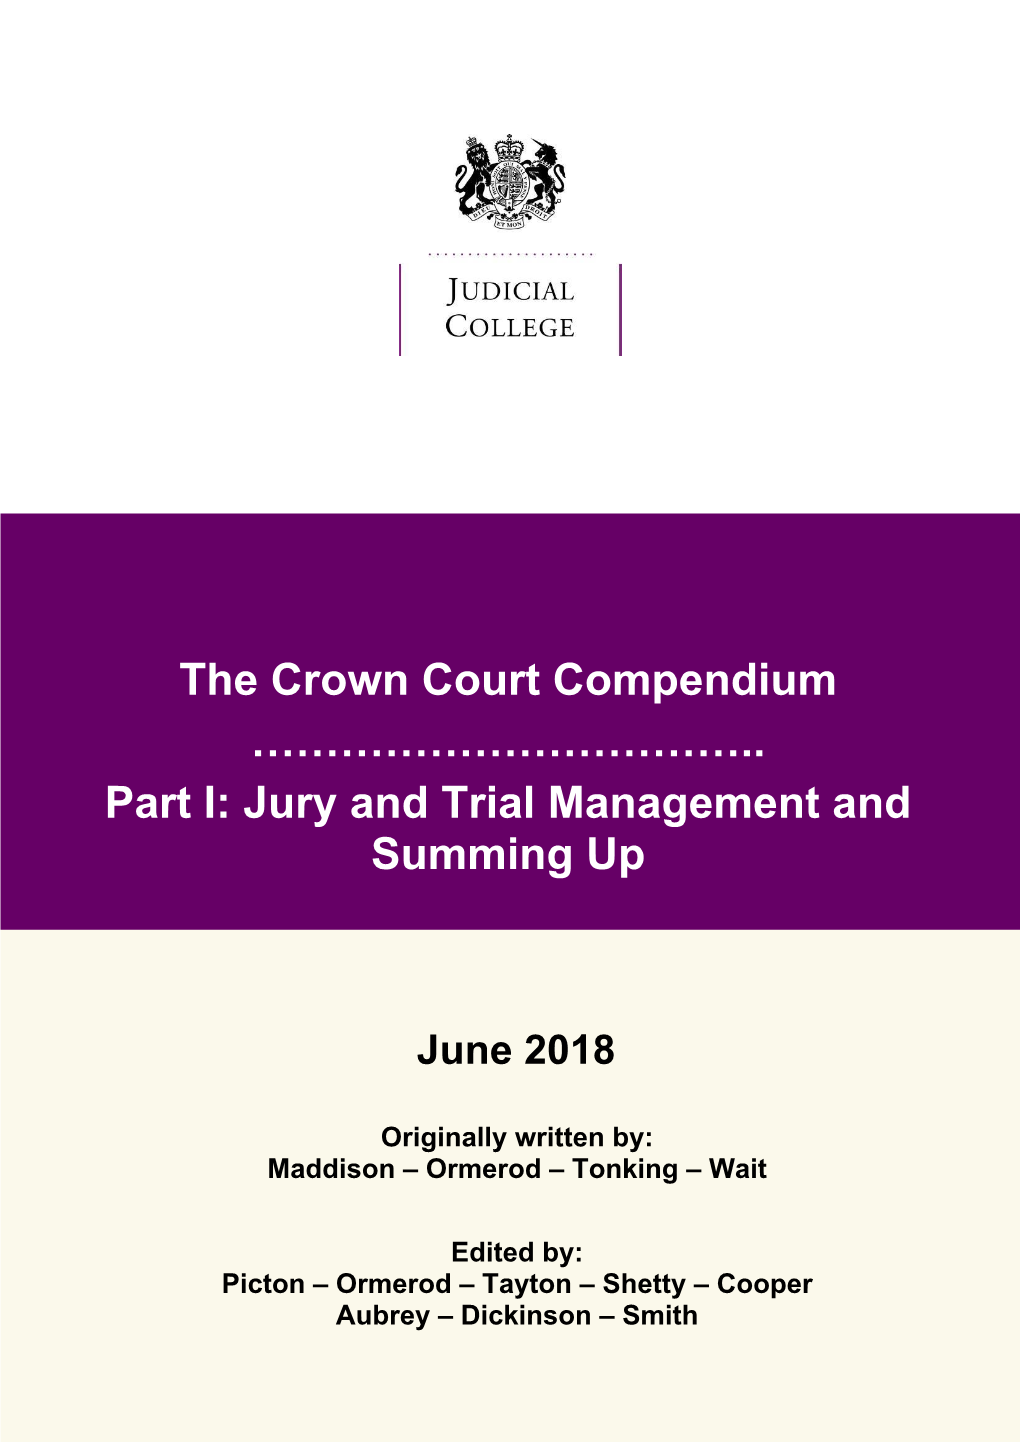 The Crown Court Compendium Part I: Jury and Trial Management And